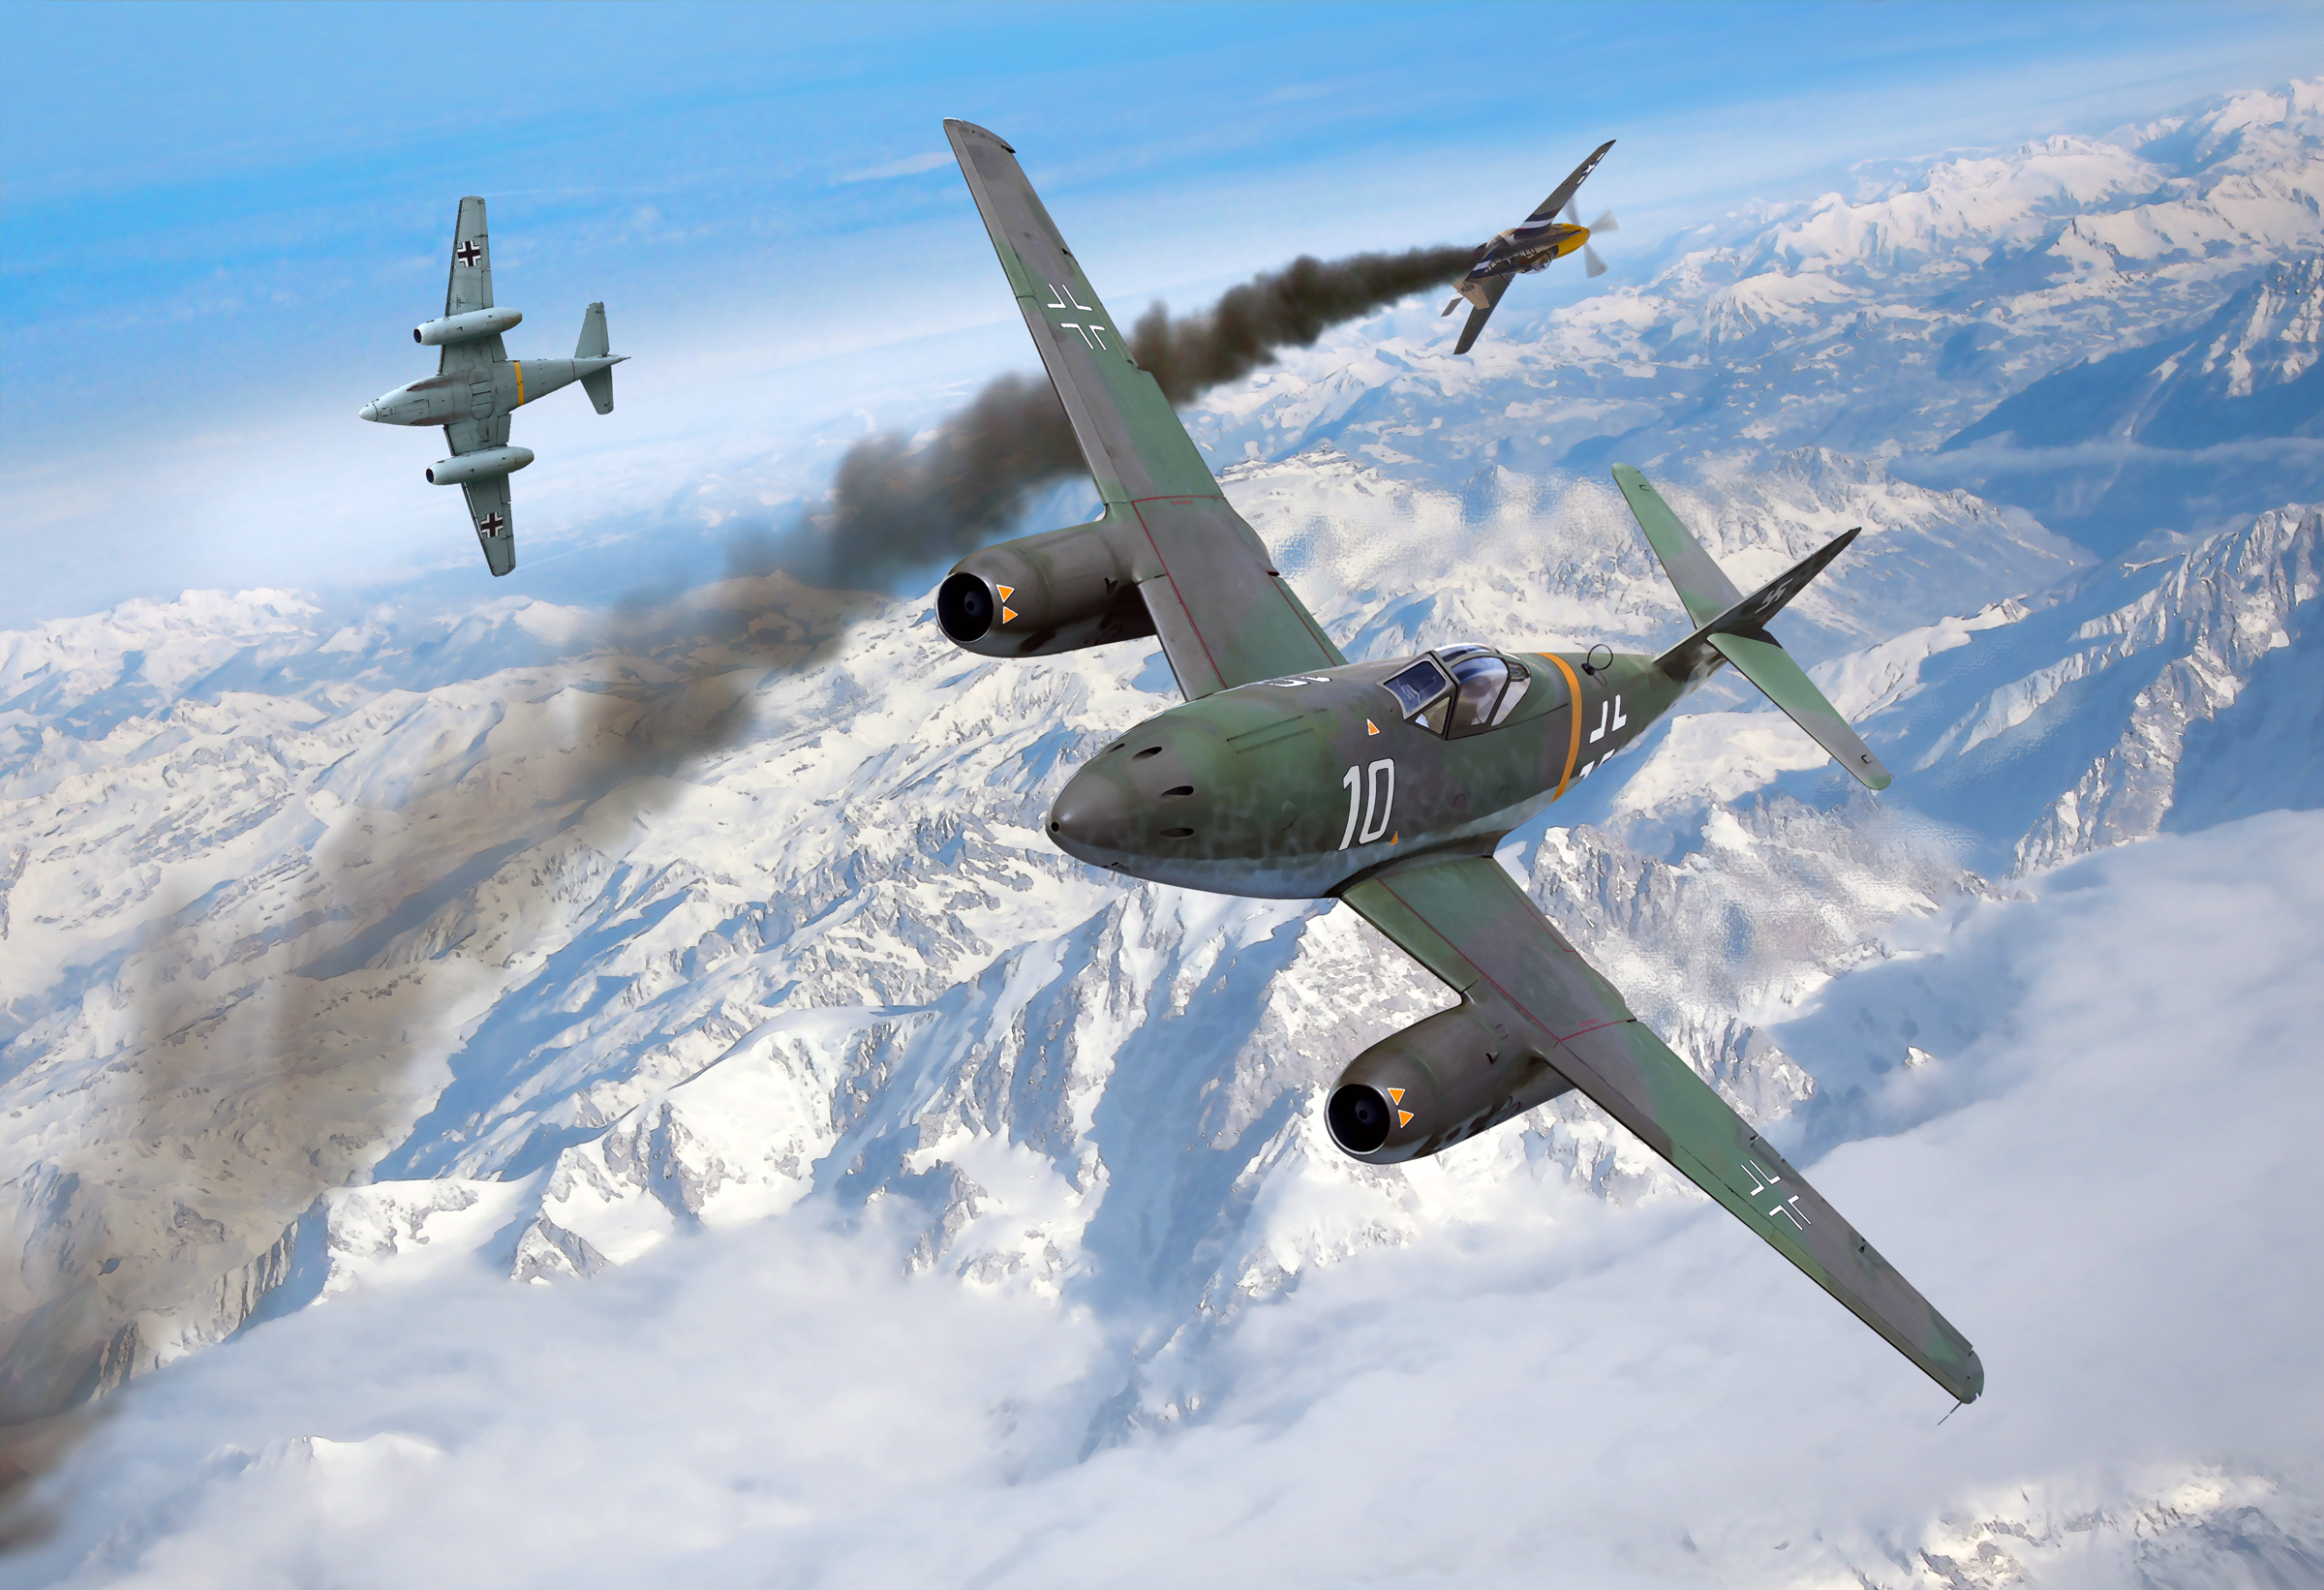 Aircraft Mountains Snow Ww2 Drawing Wallpaper Photos Pictures